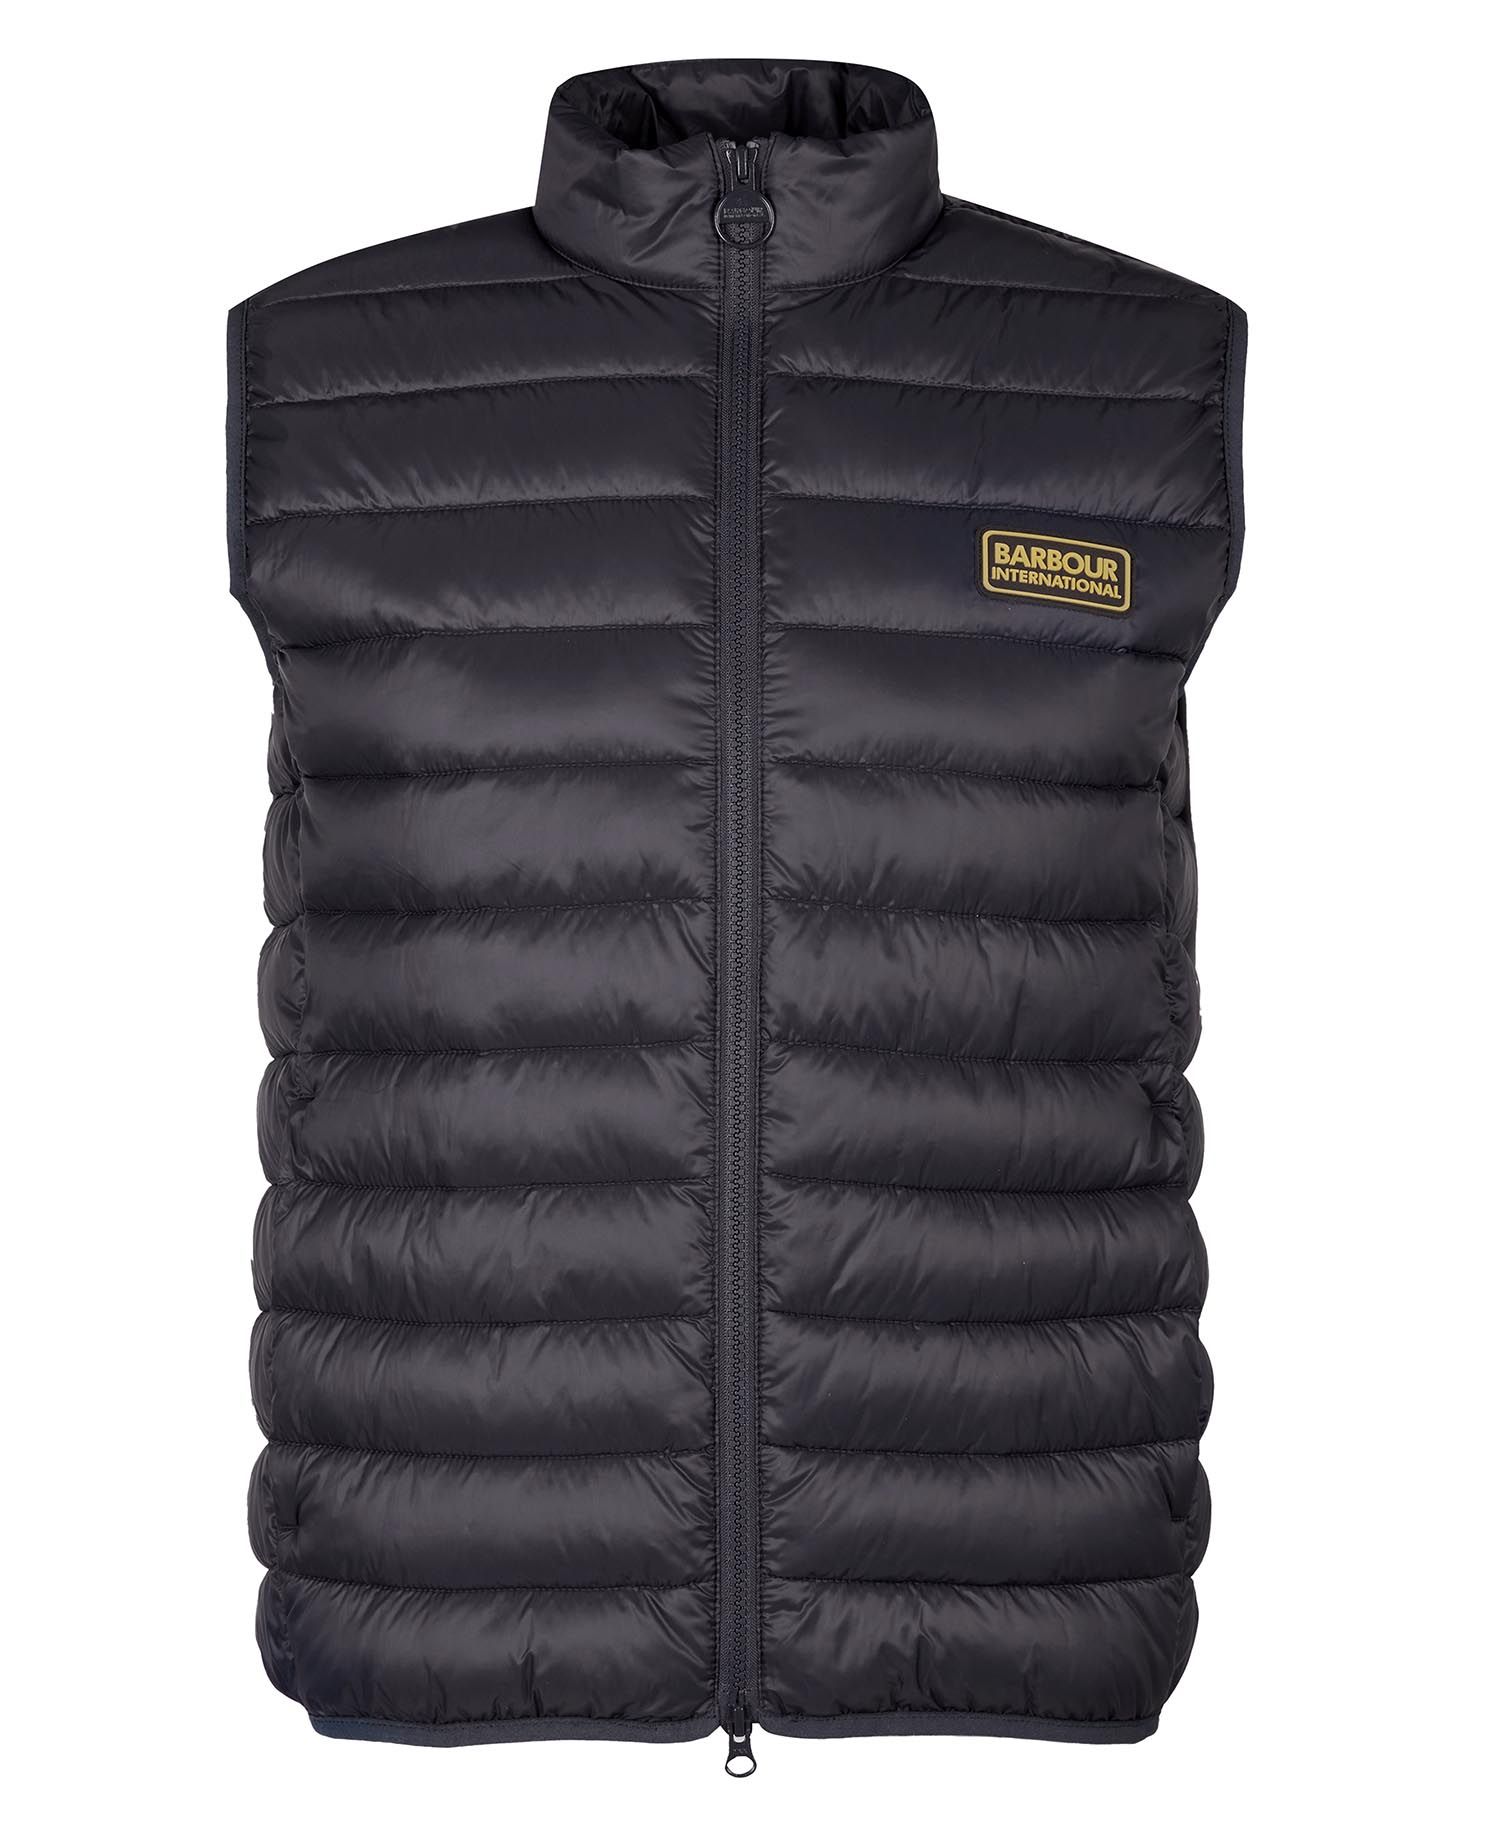 Shop the B.Intl Racer Reed Gilet today. | Barbour